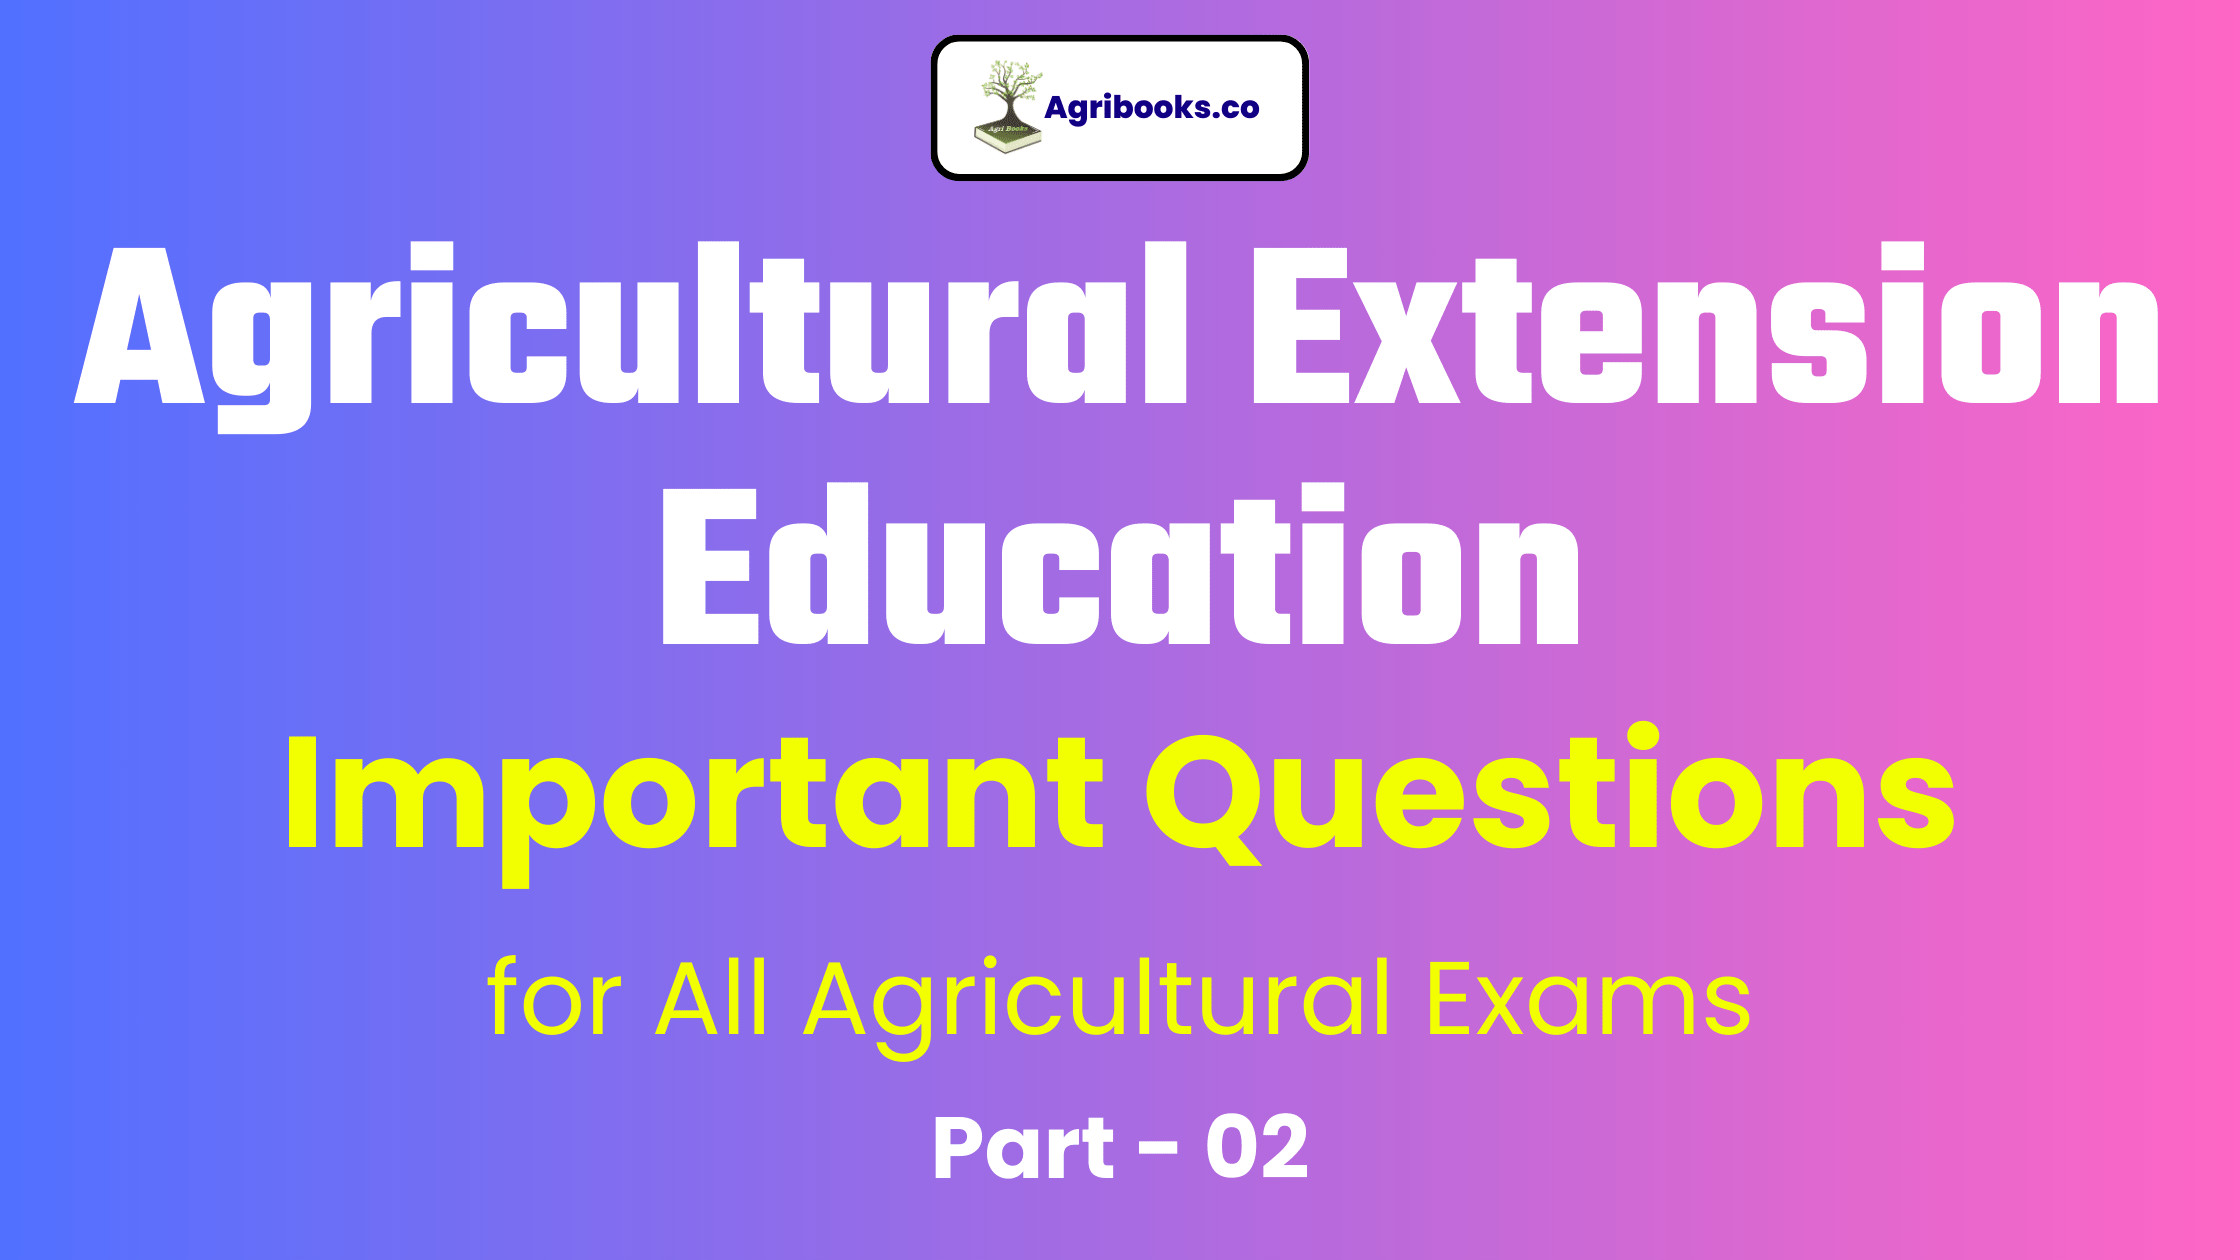 Agricultural Extension Education Questions